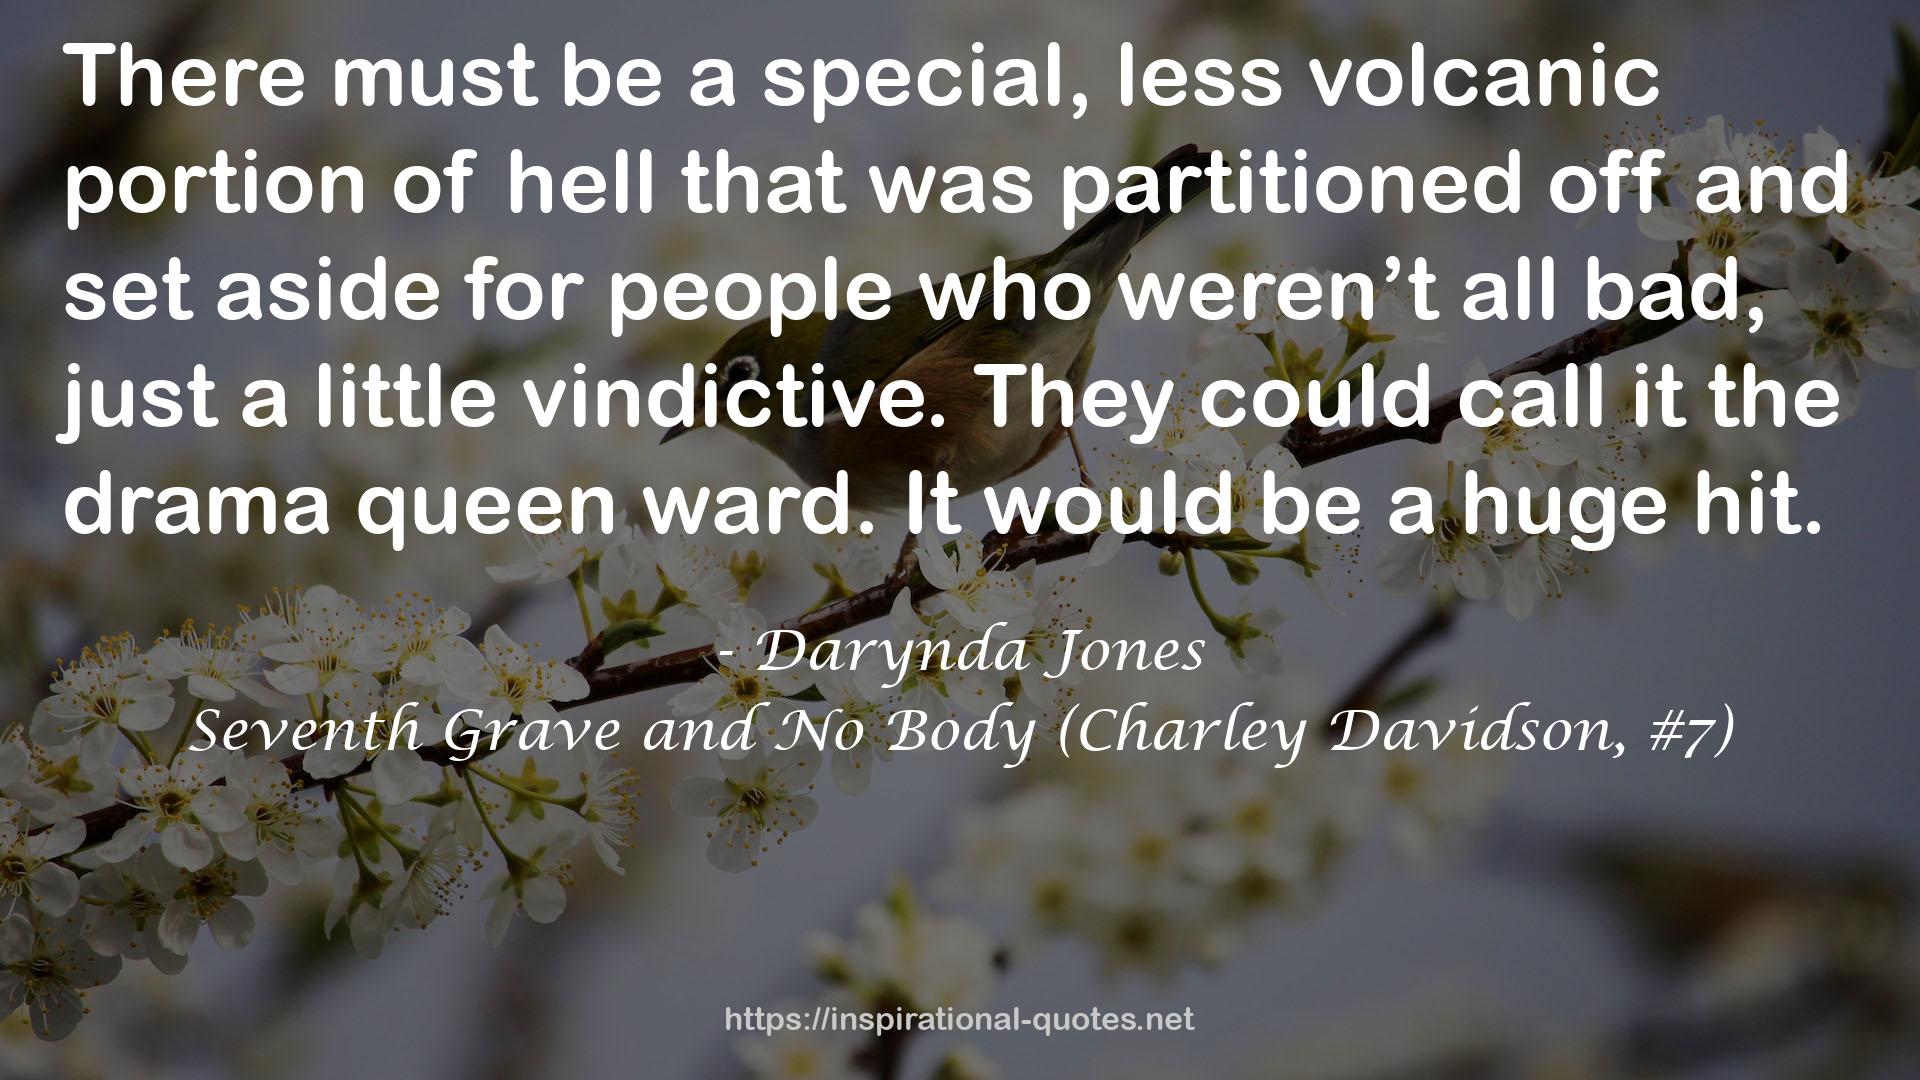 Seventh Grave and No Body (Charley Davidson, #7) QUOTES